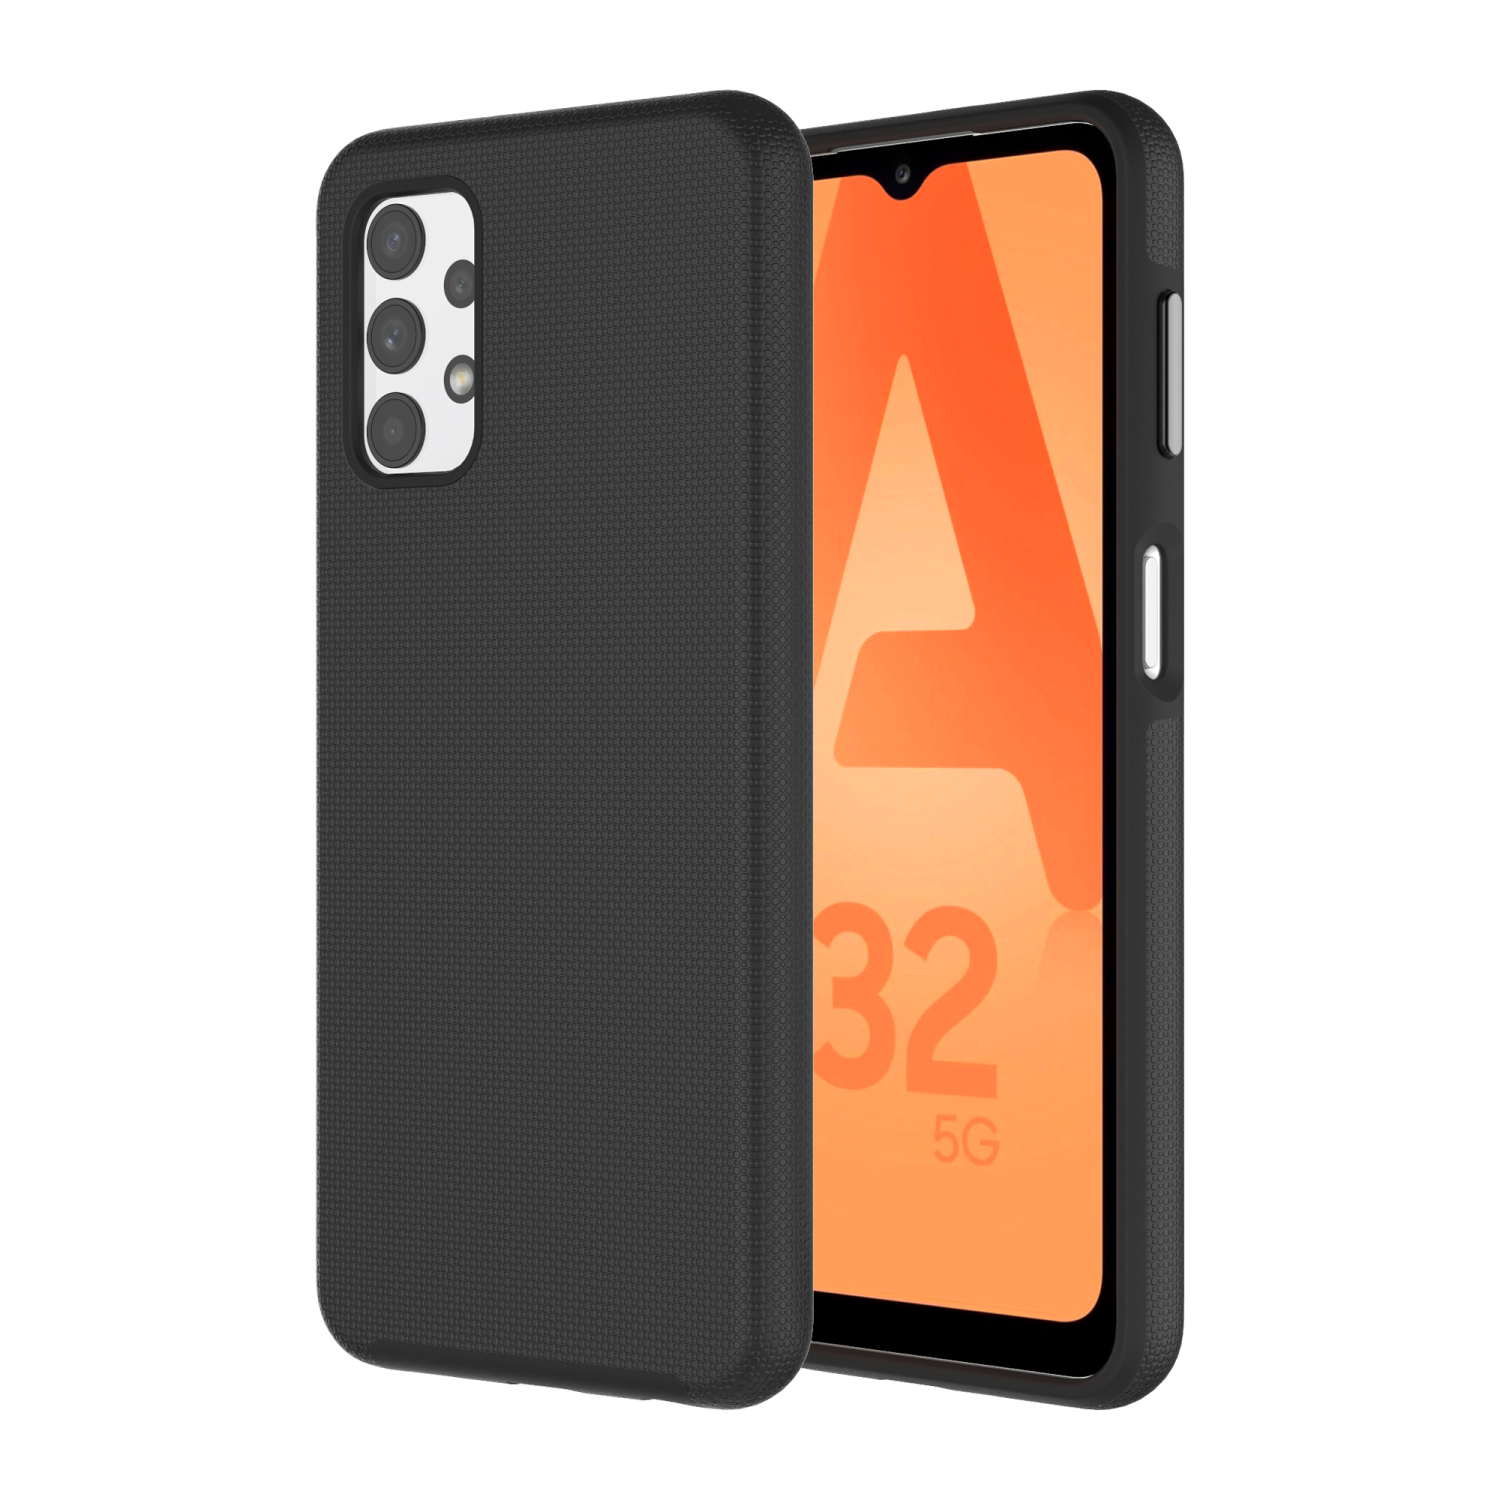 AXS PROTech Dual-Layered Anti-Shock Case with Military-Grade Durability for Samsung Galaxy A32 5G